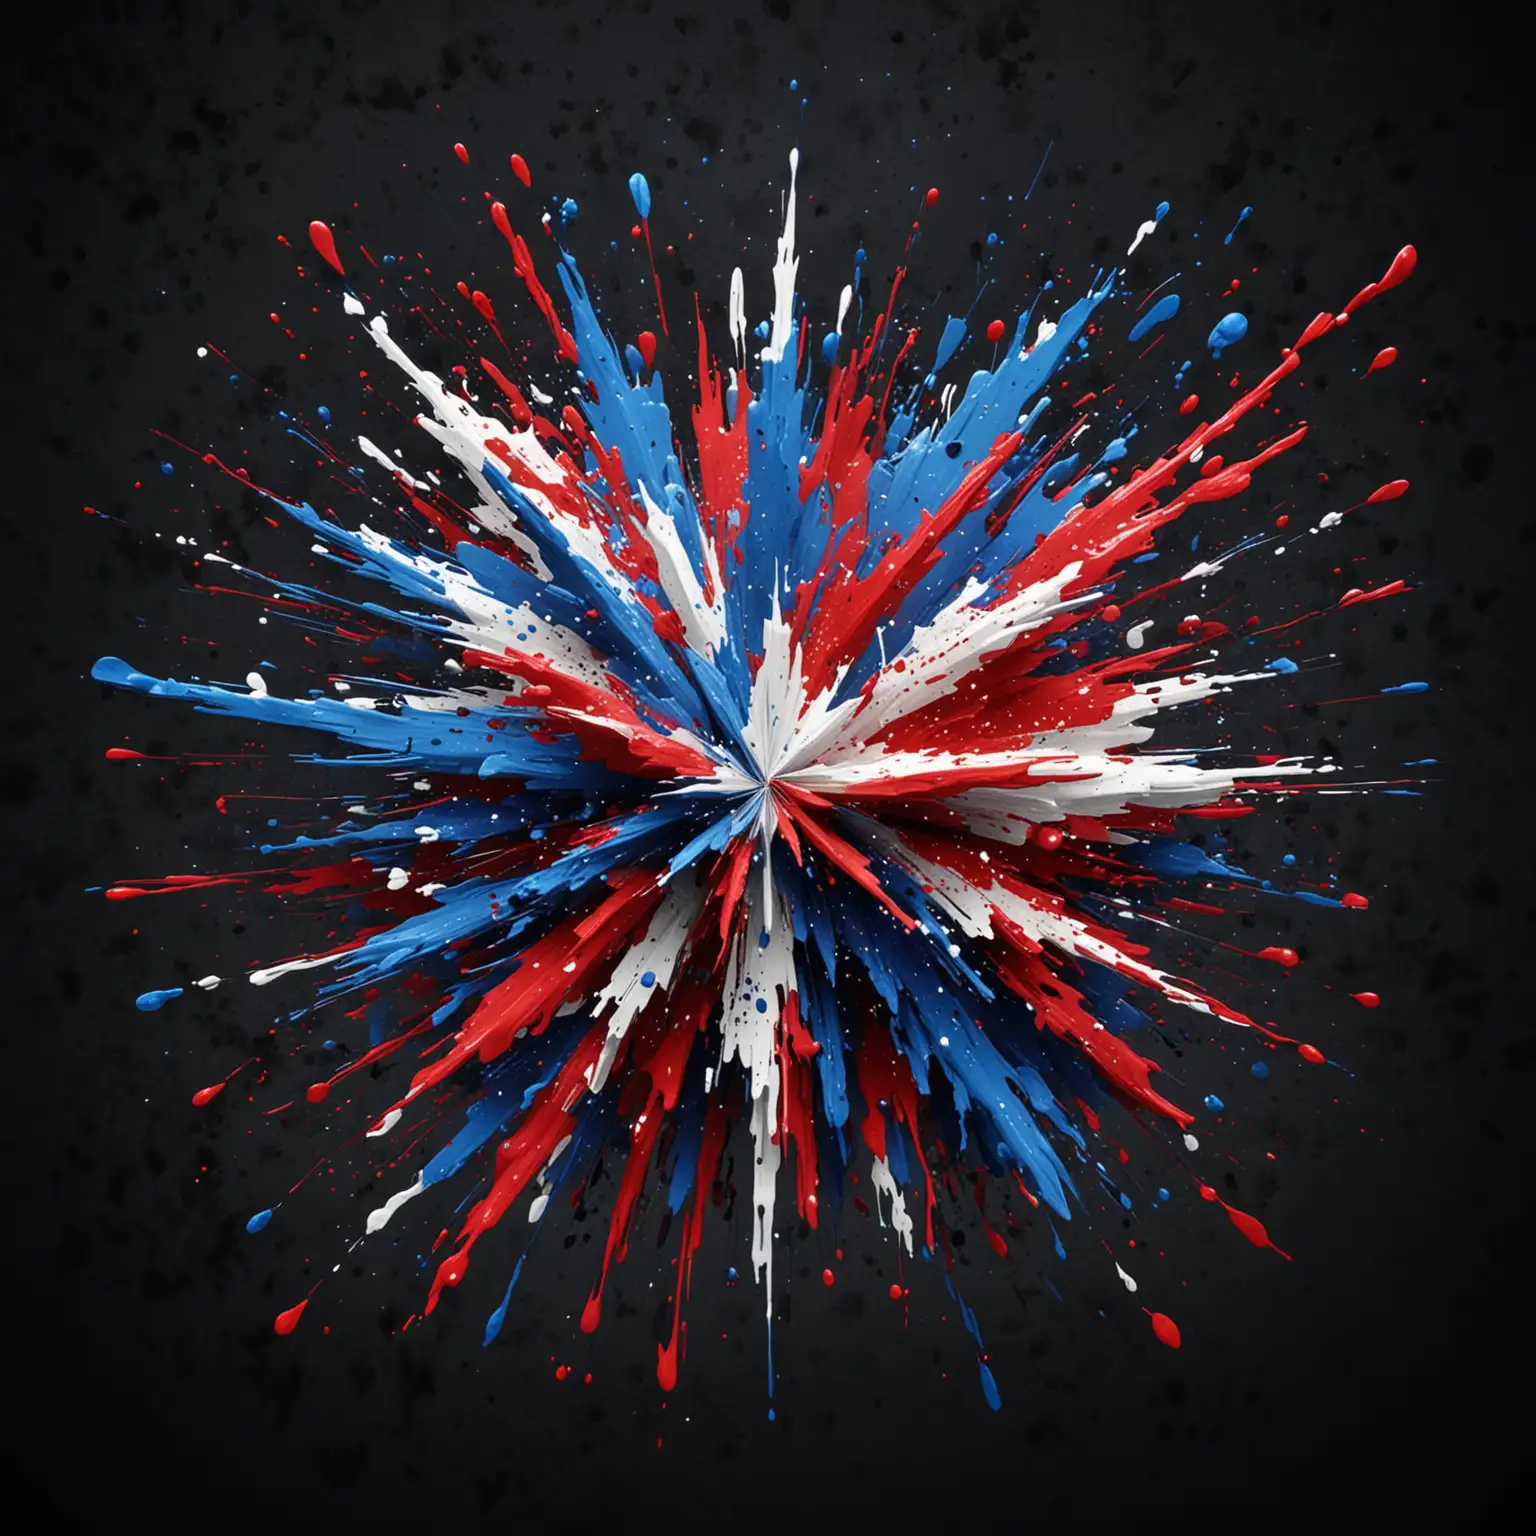 red white and blue ink splatter explosion front the center with 3d stars on a dark background